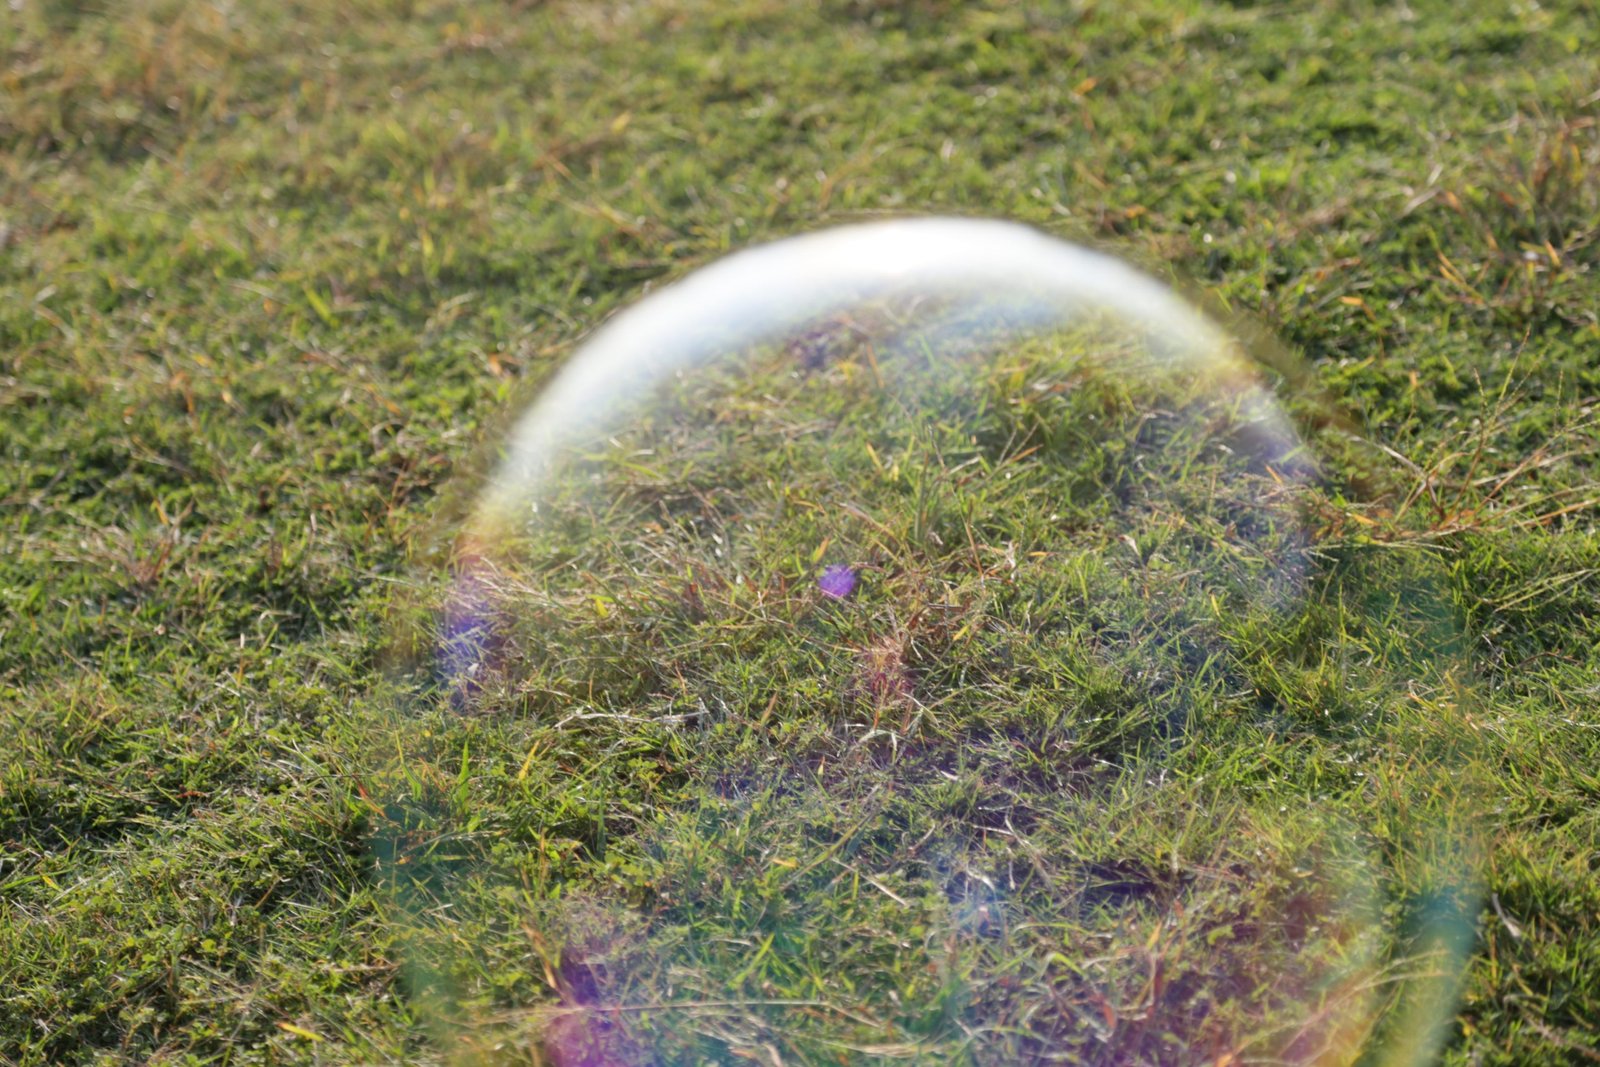 Bubbles on the lawn